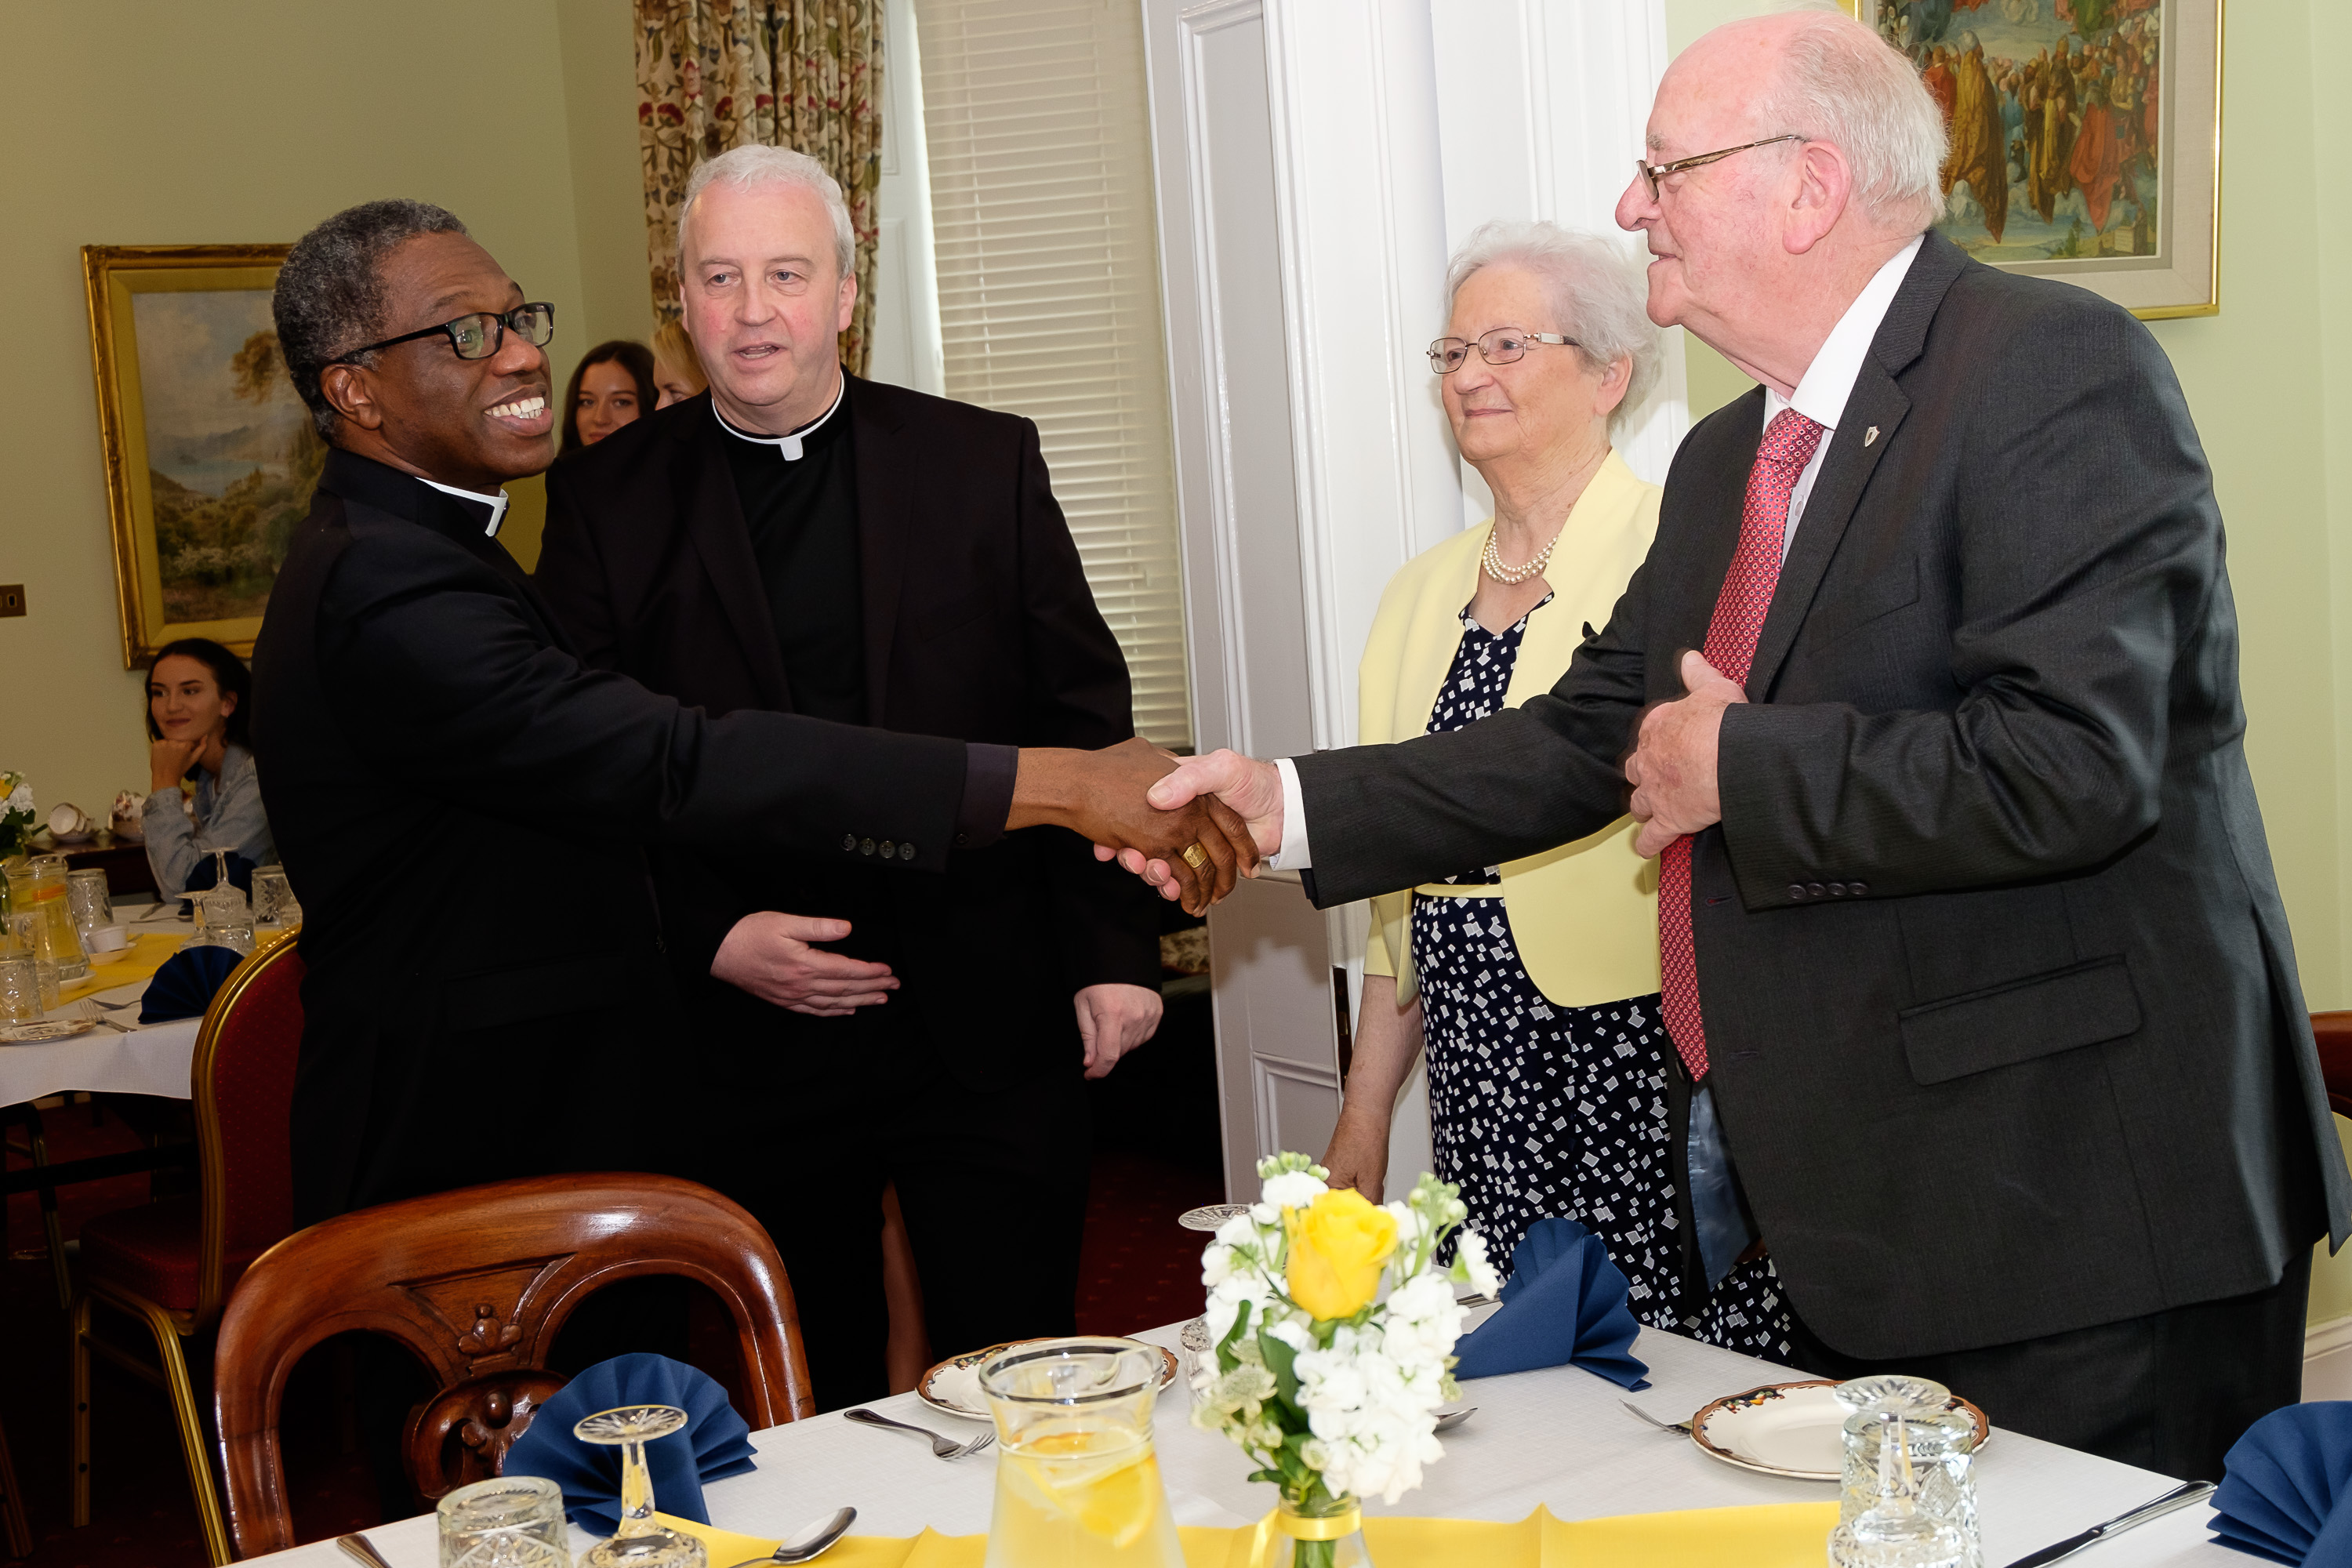 Papal Nuncio Archbishop Jude Thaddeus Okolo greets Tony Router watched by Bishop Michael Router and Mrs Nora RouterOrdination of Bishop Michael RouterSt Patrick's Cathedral, Armagh,  21 July 2019Credit: LiamMcArdle.com